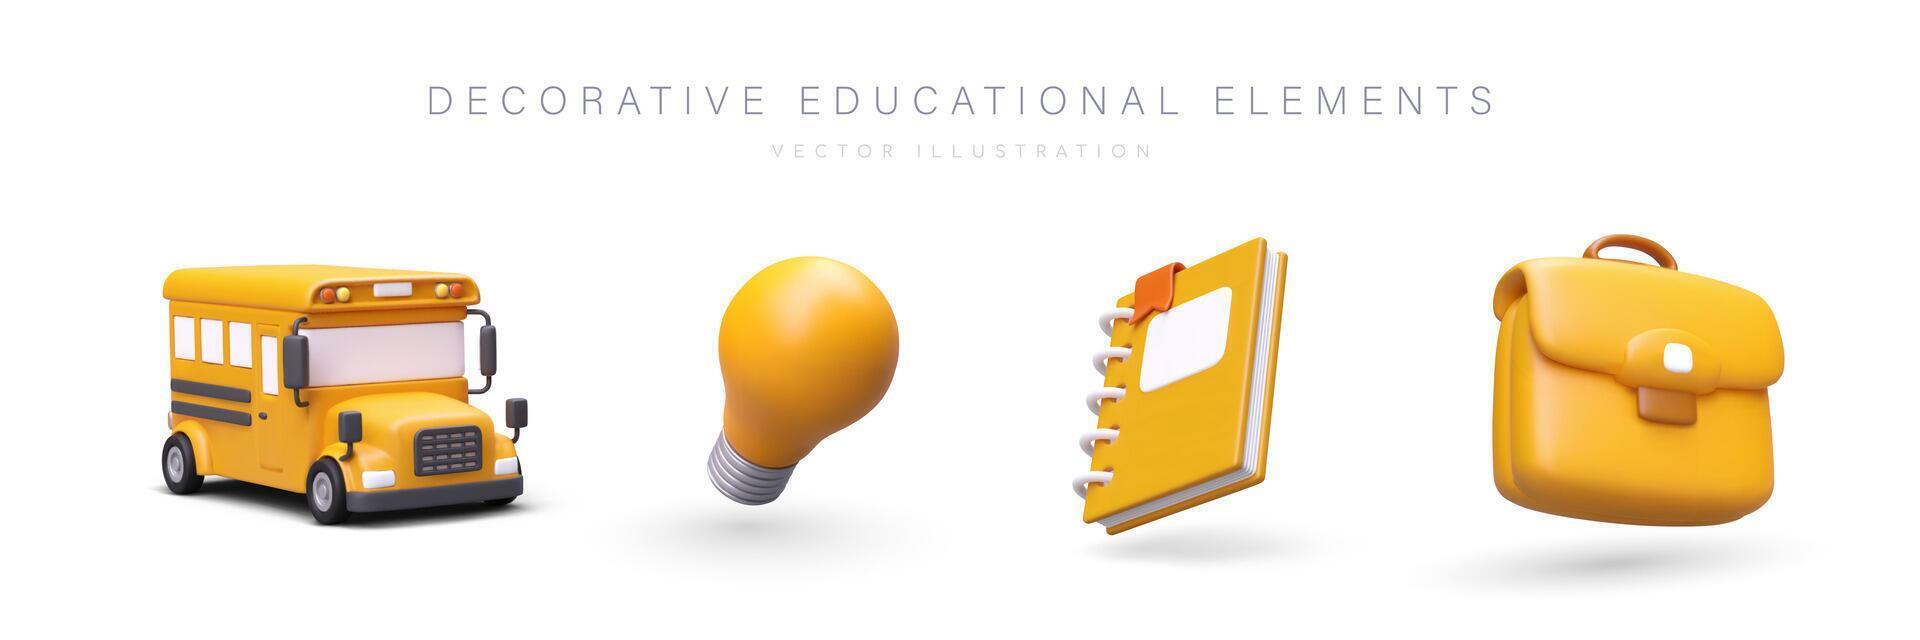 Collection of 3D yellow school icons. Set of decorative educational elements vector